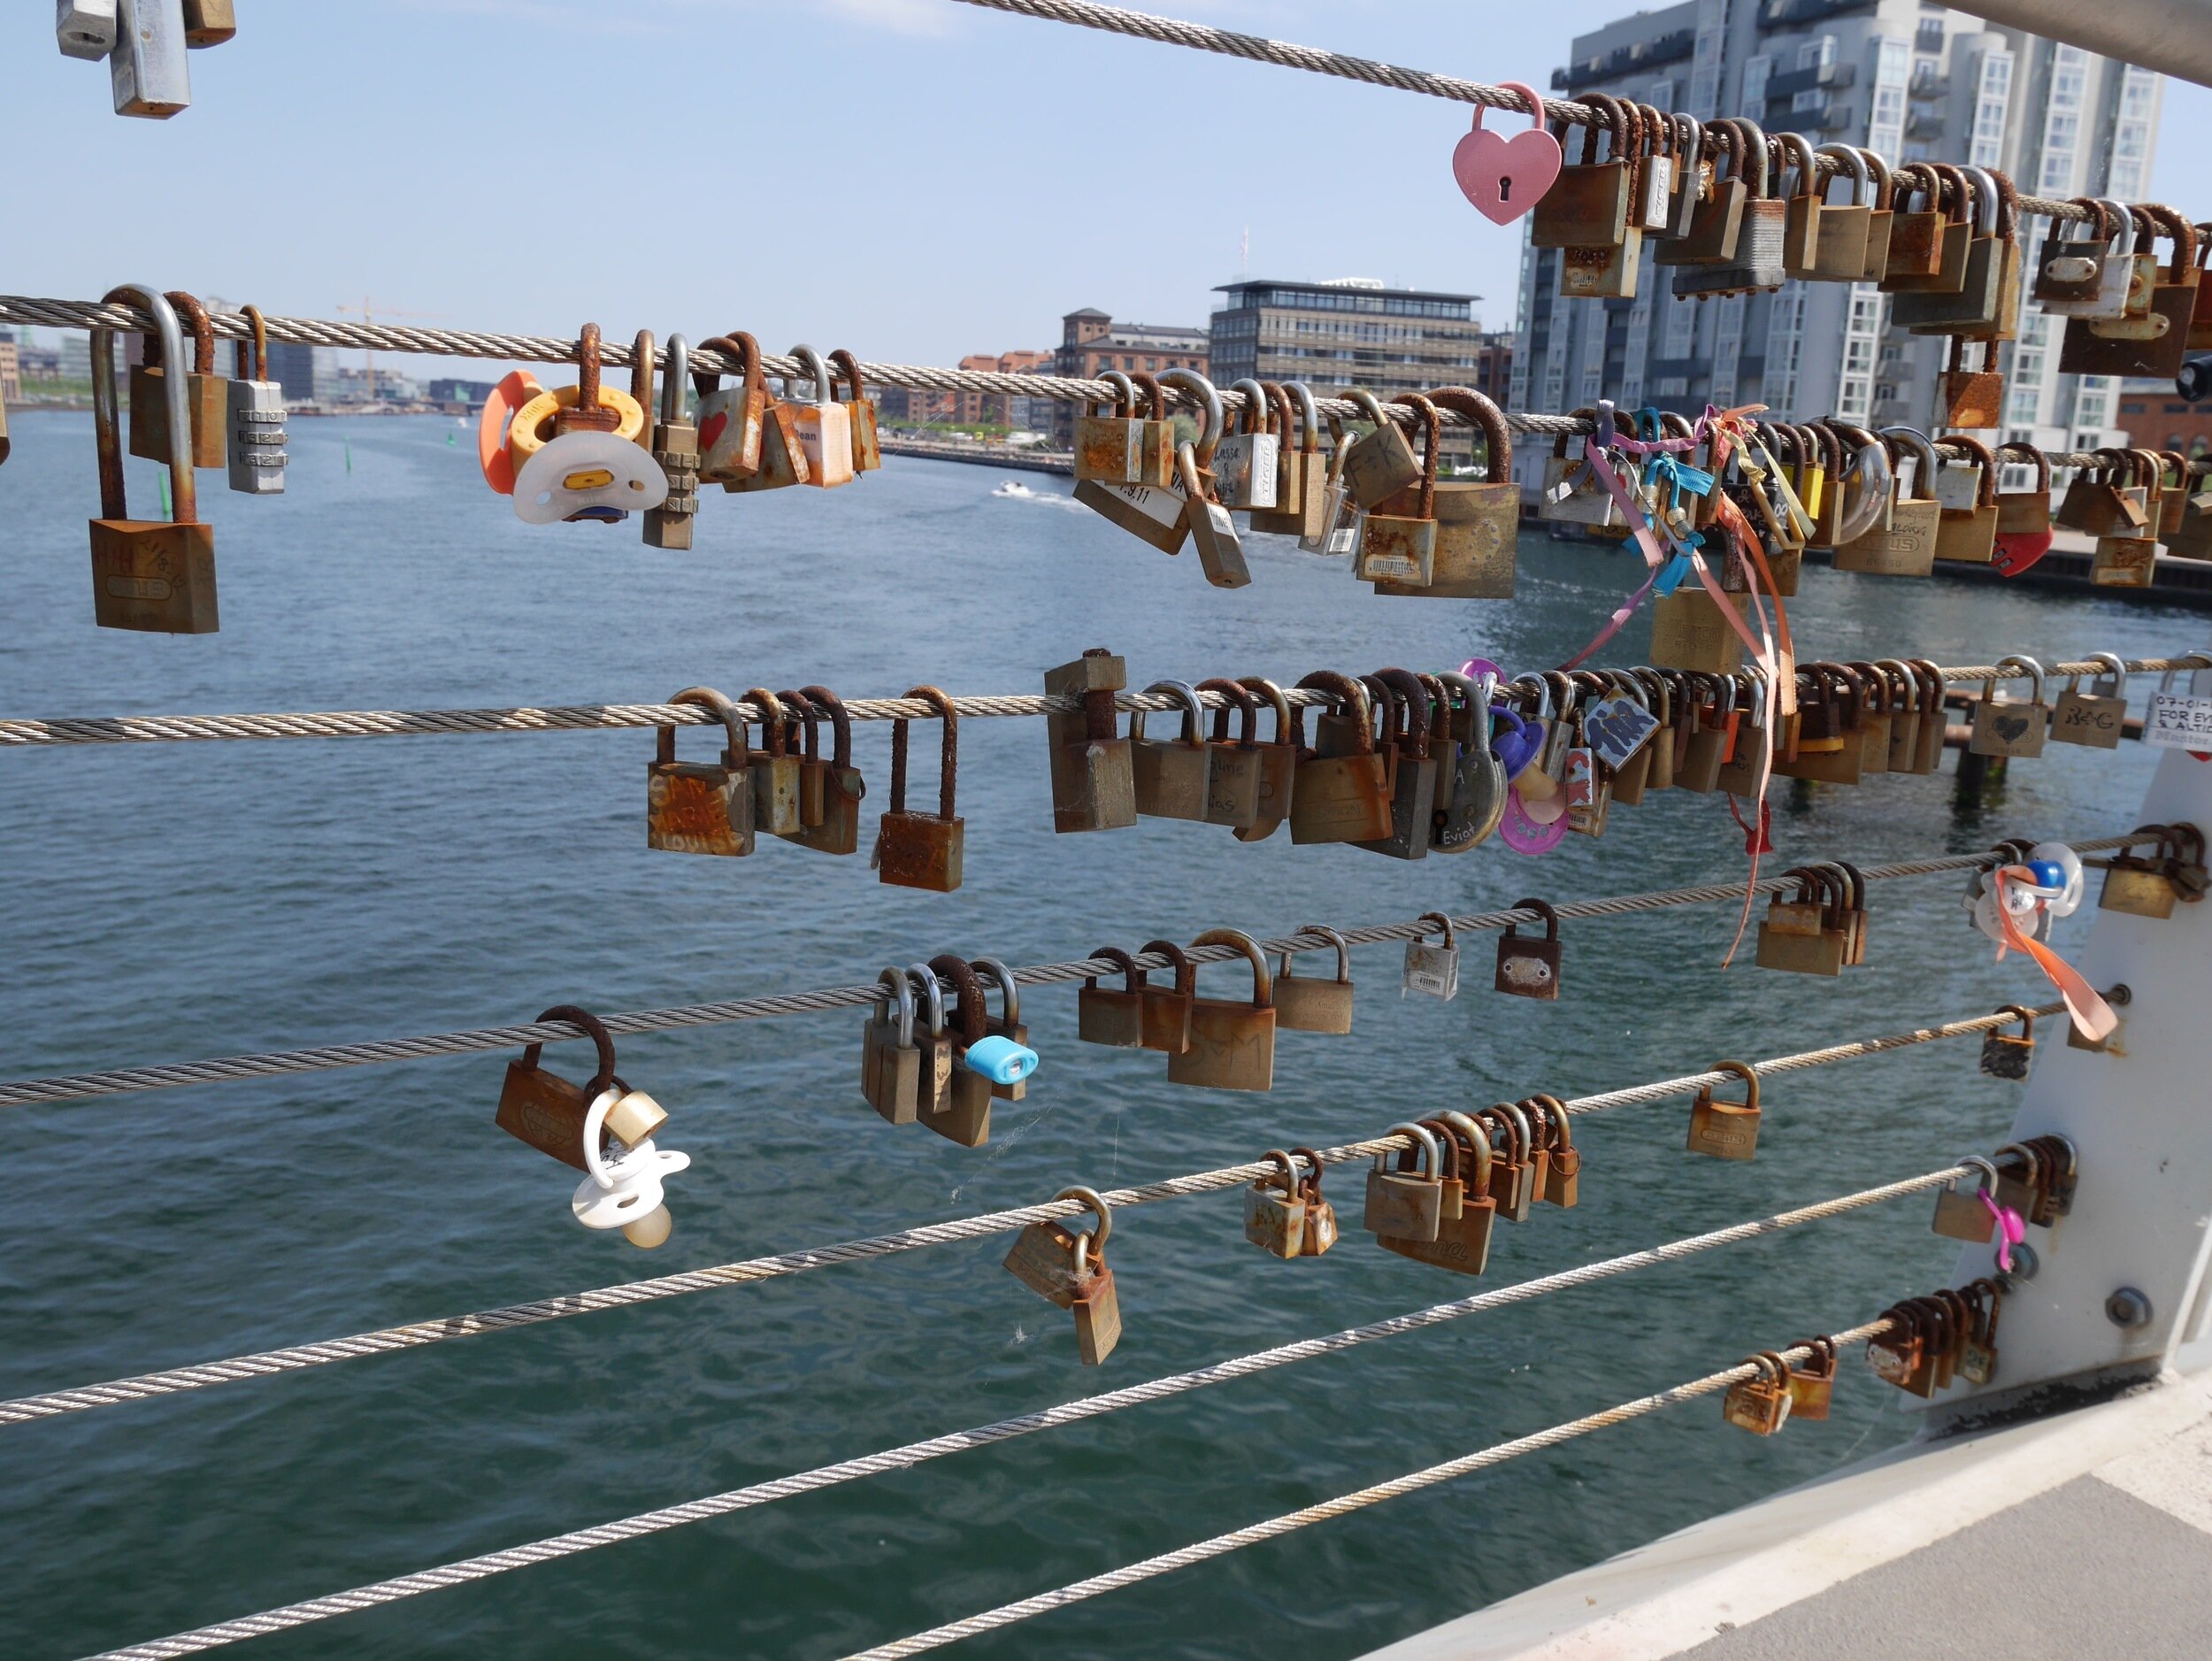 like pont de arts in Paris, the locks of love are catching on in Copenhagen. &nbsp;you can find them on many bridges throughout the city.&nbsp;